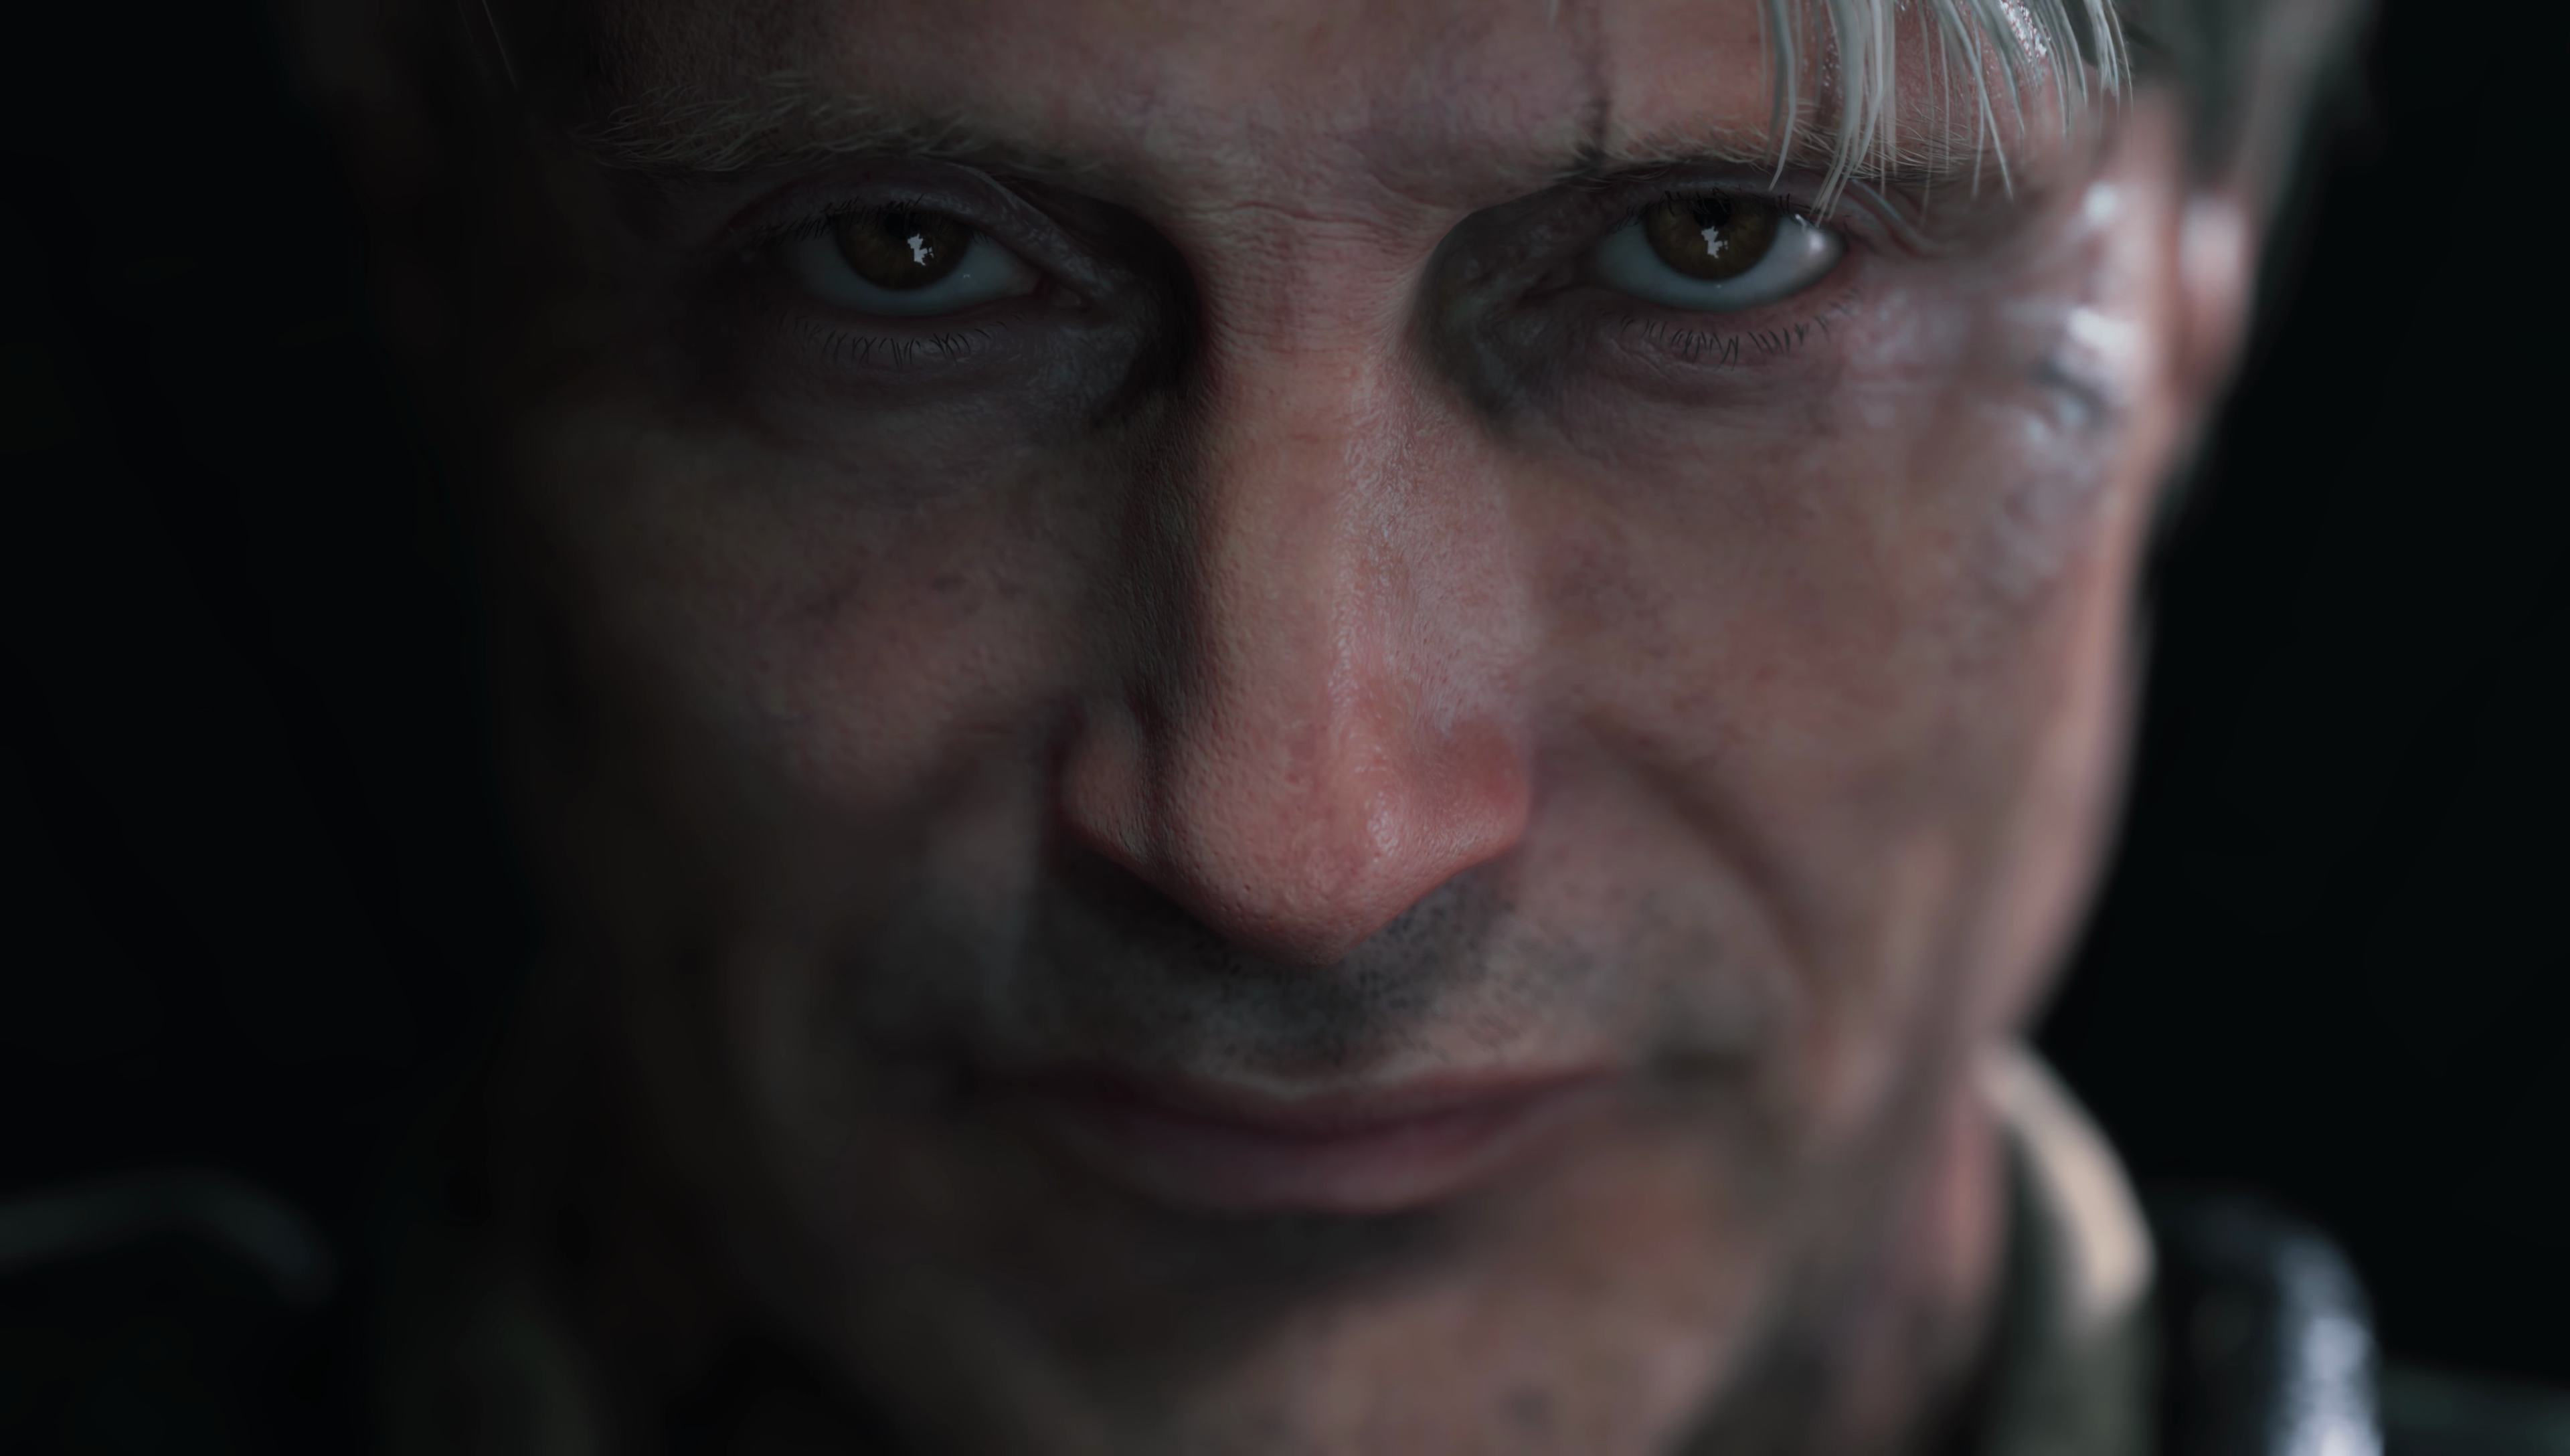 General 3840x2176 Death Stranding Hideo Kojima Kojima Productions apocalyptic horror Mads Mikkelsen video games actor Danish video game characters 505 Games